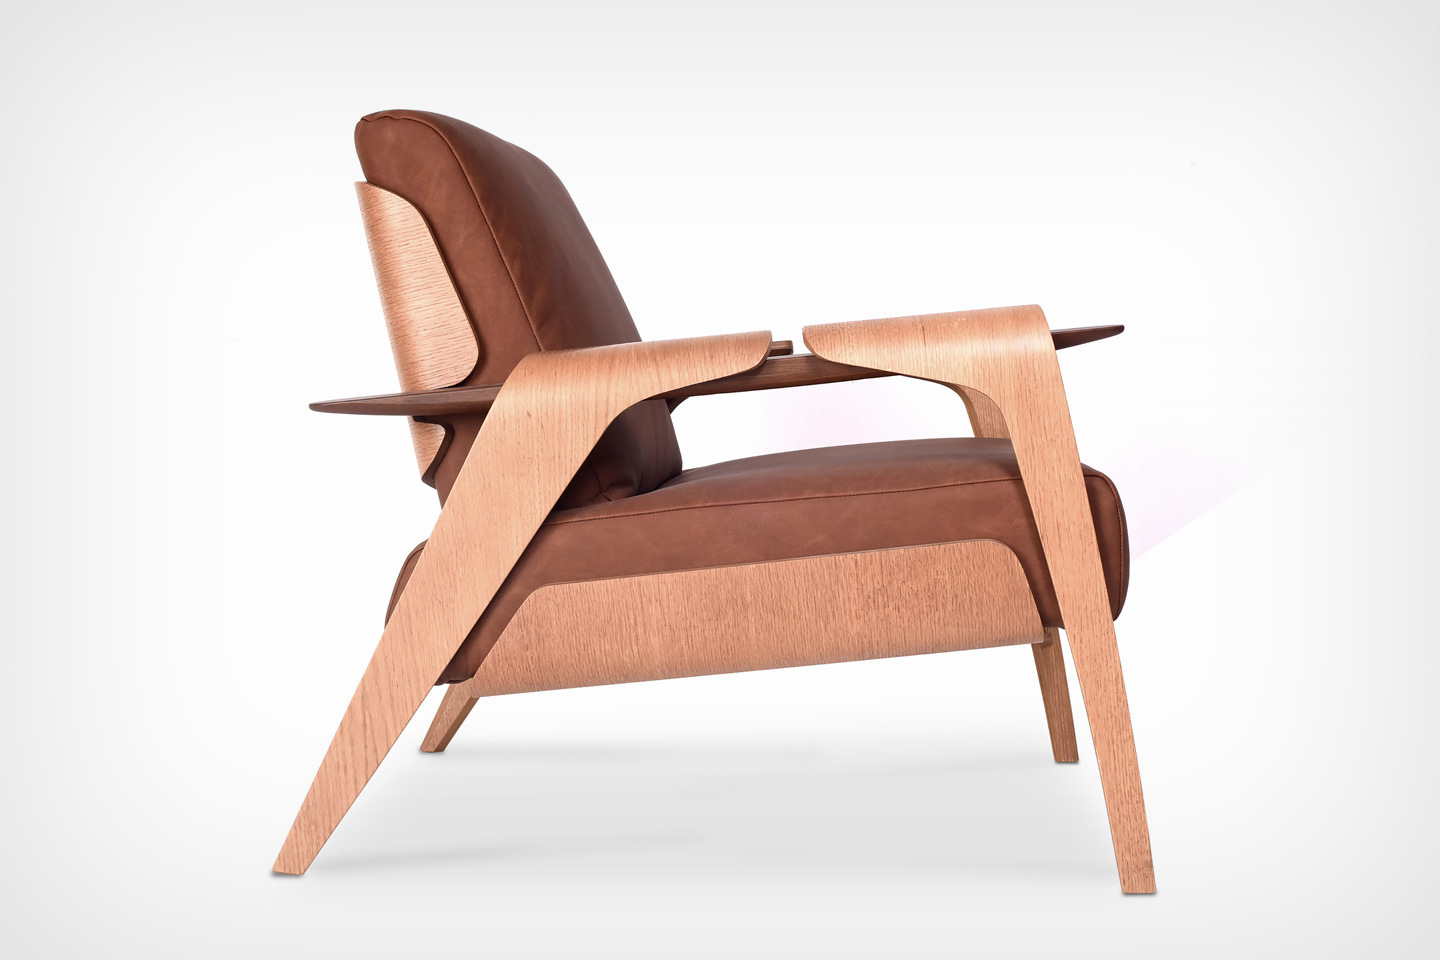 #With its bent wood veneer and leather design, the Fly Armchair feels like a modern take on the Eames Lounge Chair